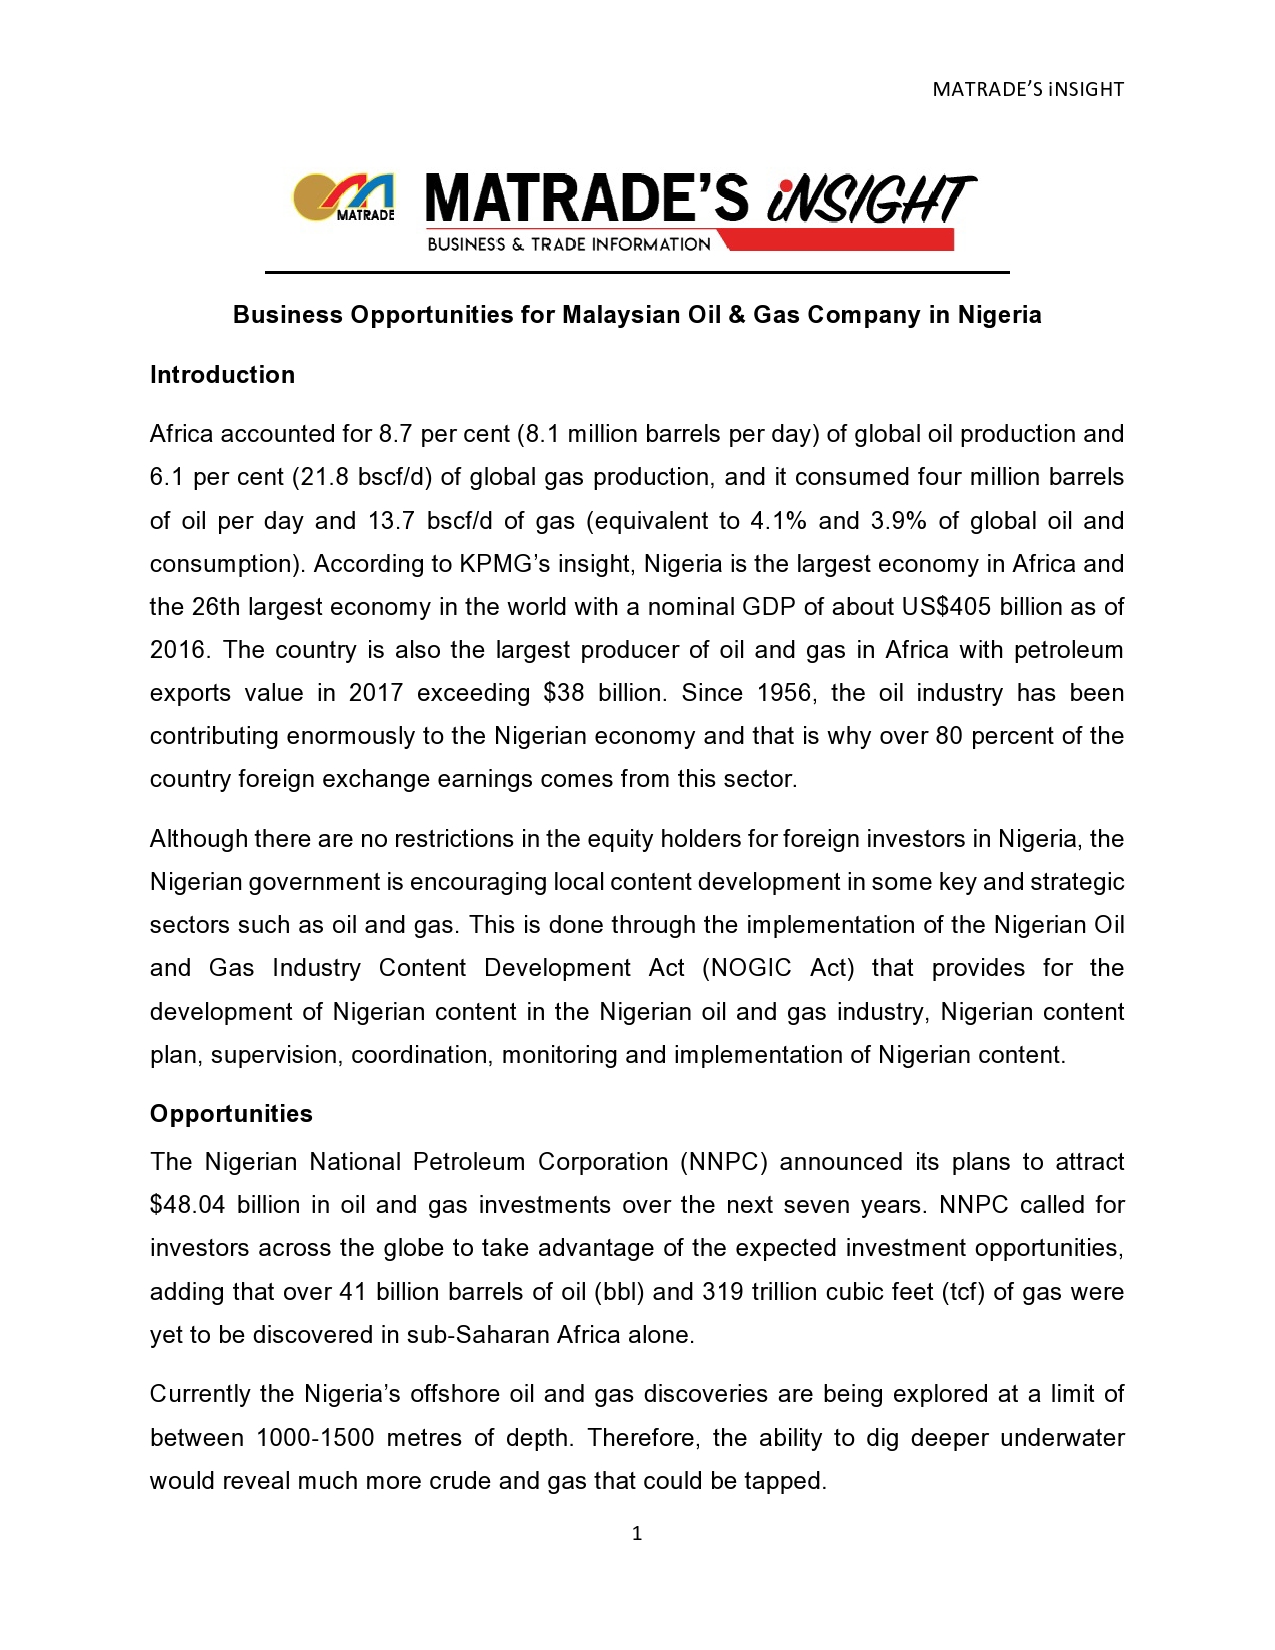 Article Potential for Malaysian Oil Gas Company in Nigeria 01